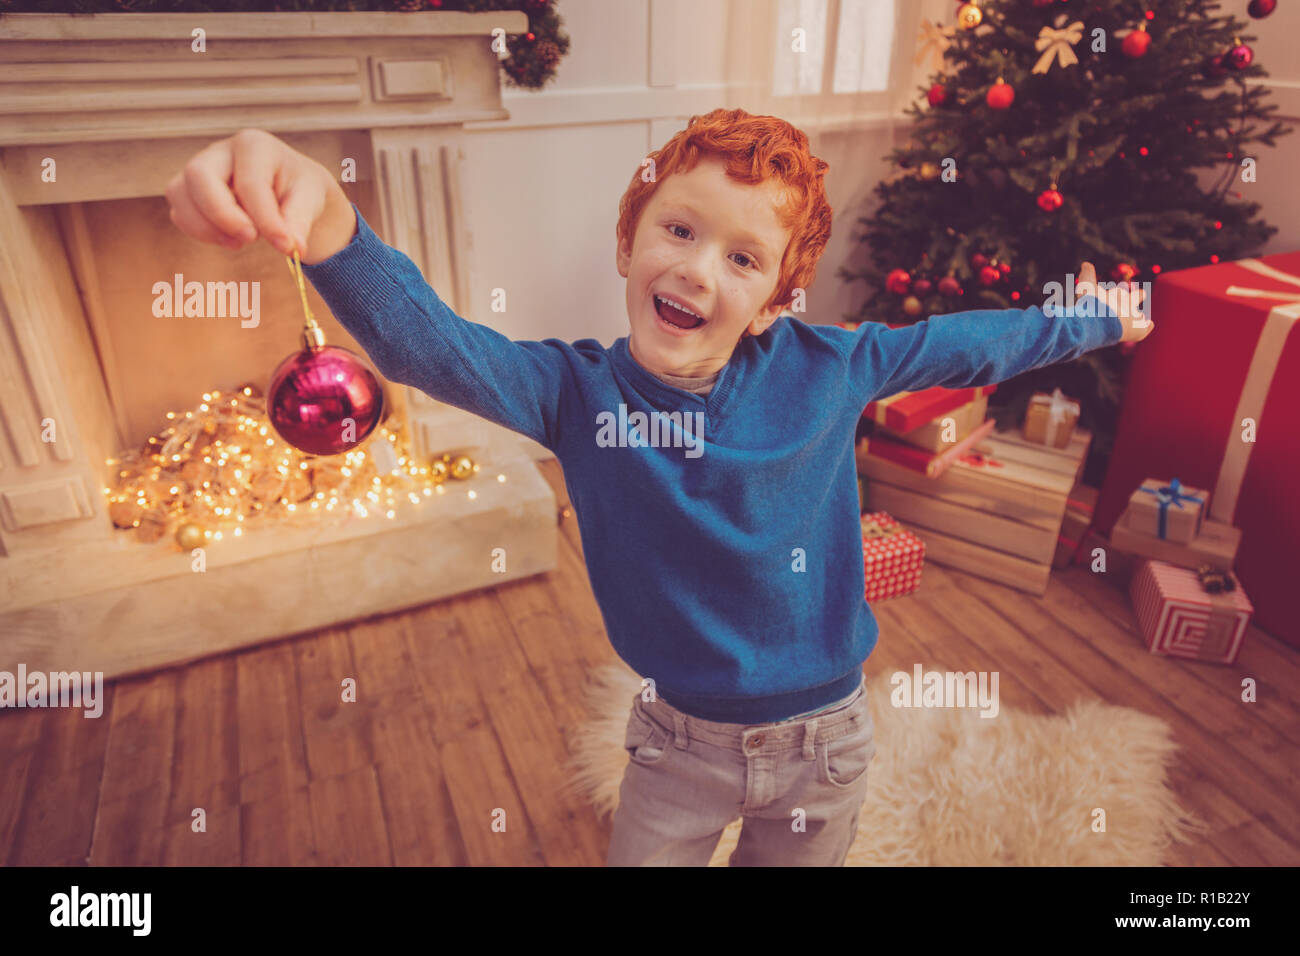 Cheerful red-haired boy posing with a Christmas ball Stock Photo